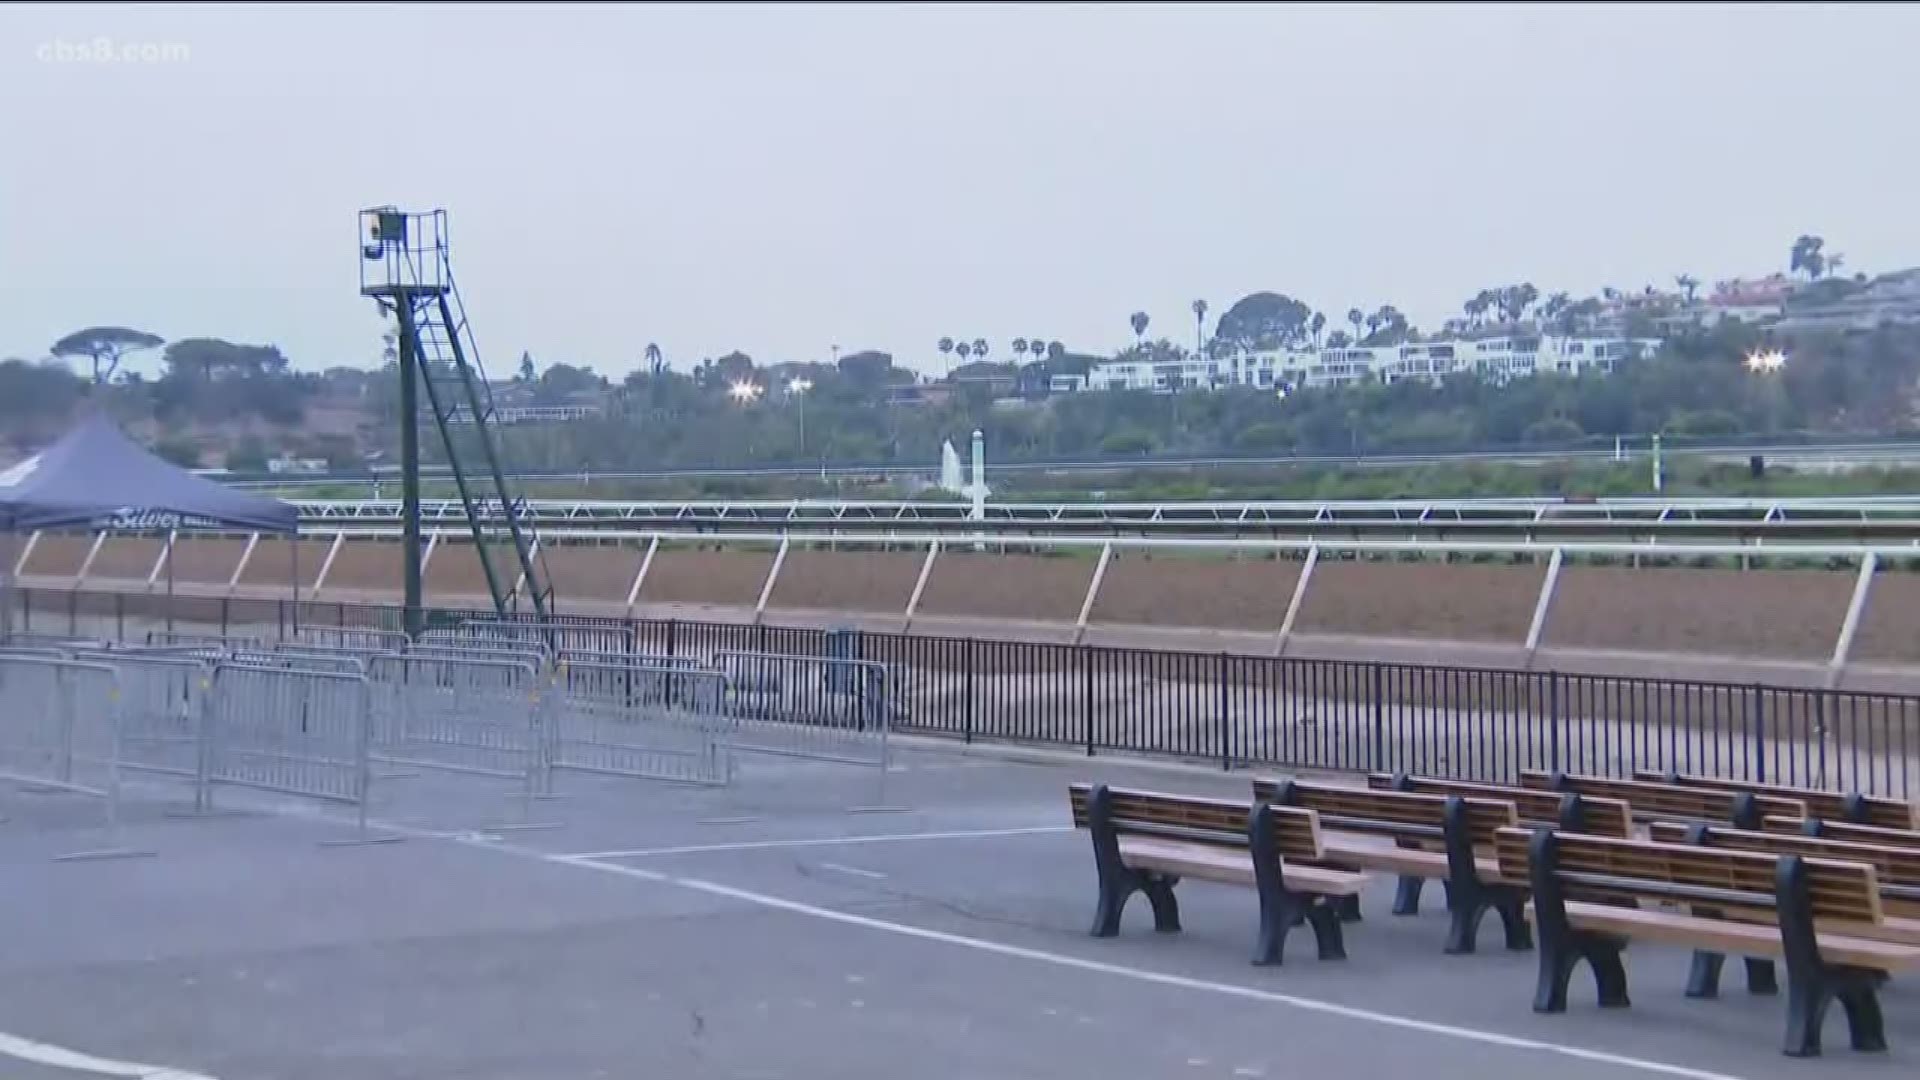 With tens of thousands of people expected in Del Mar on Wednesday, there are a few tips to pay attention to so your trip is as seamless as possible.